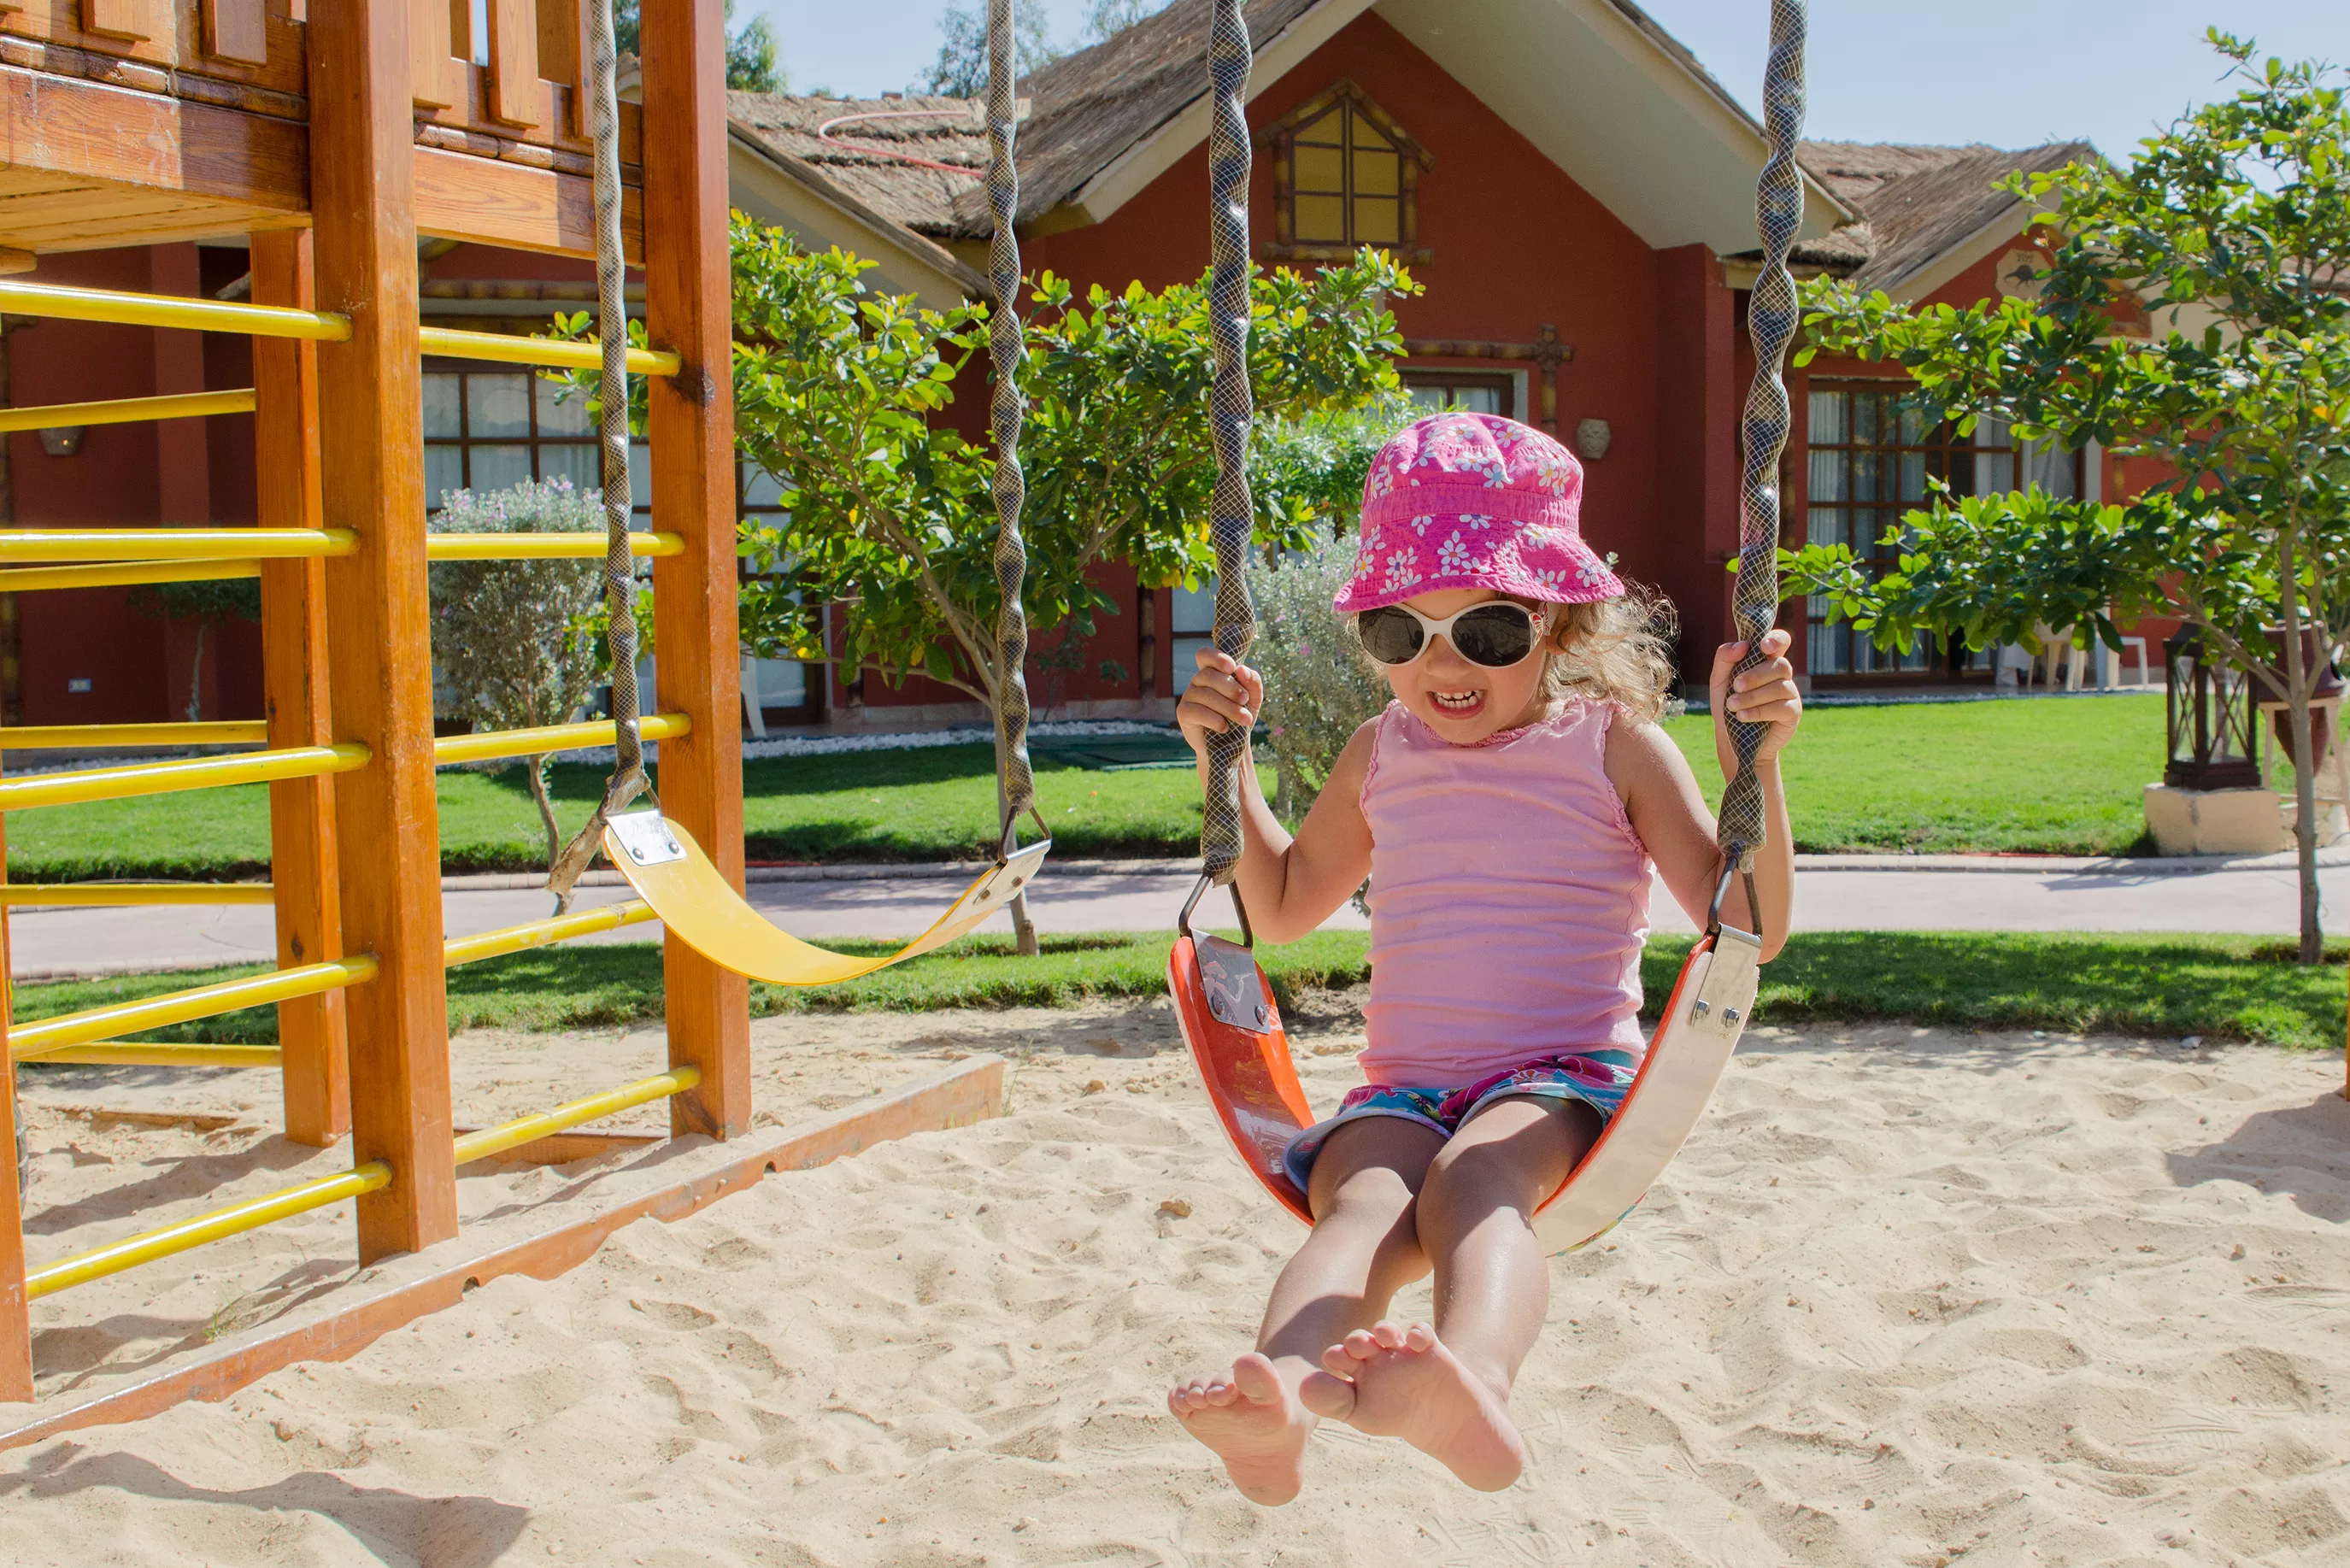 Little girl on swing in playground